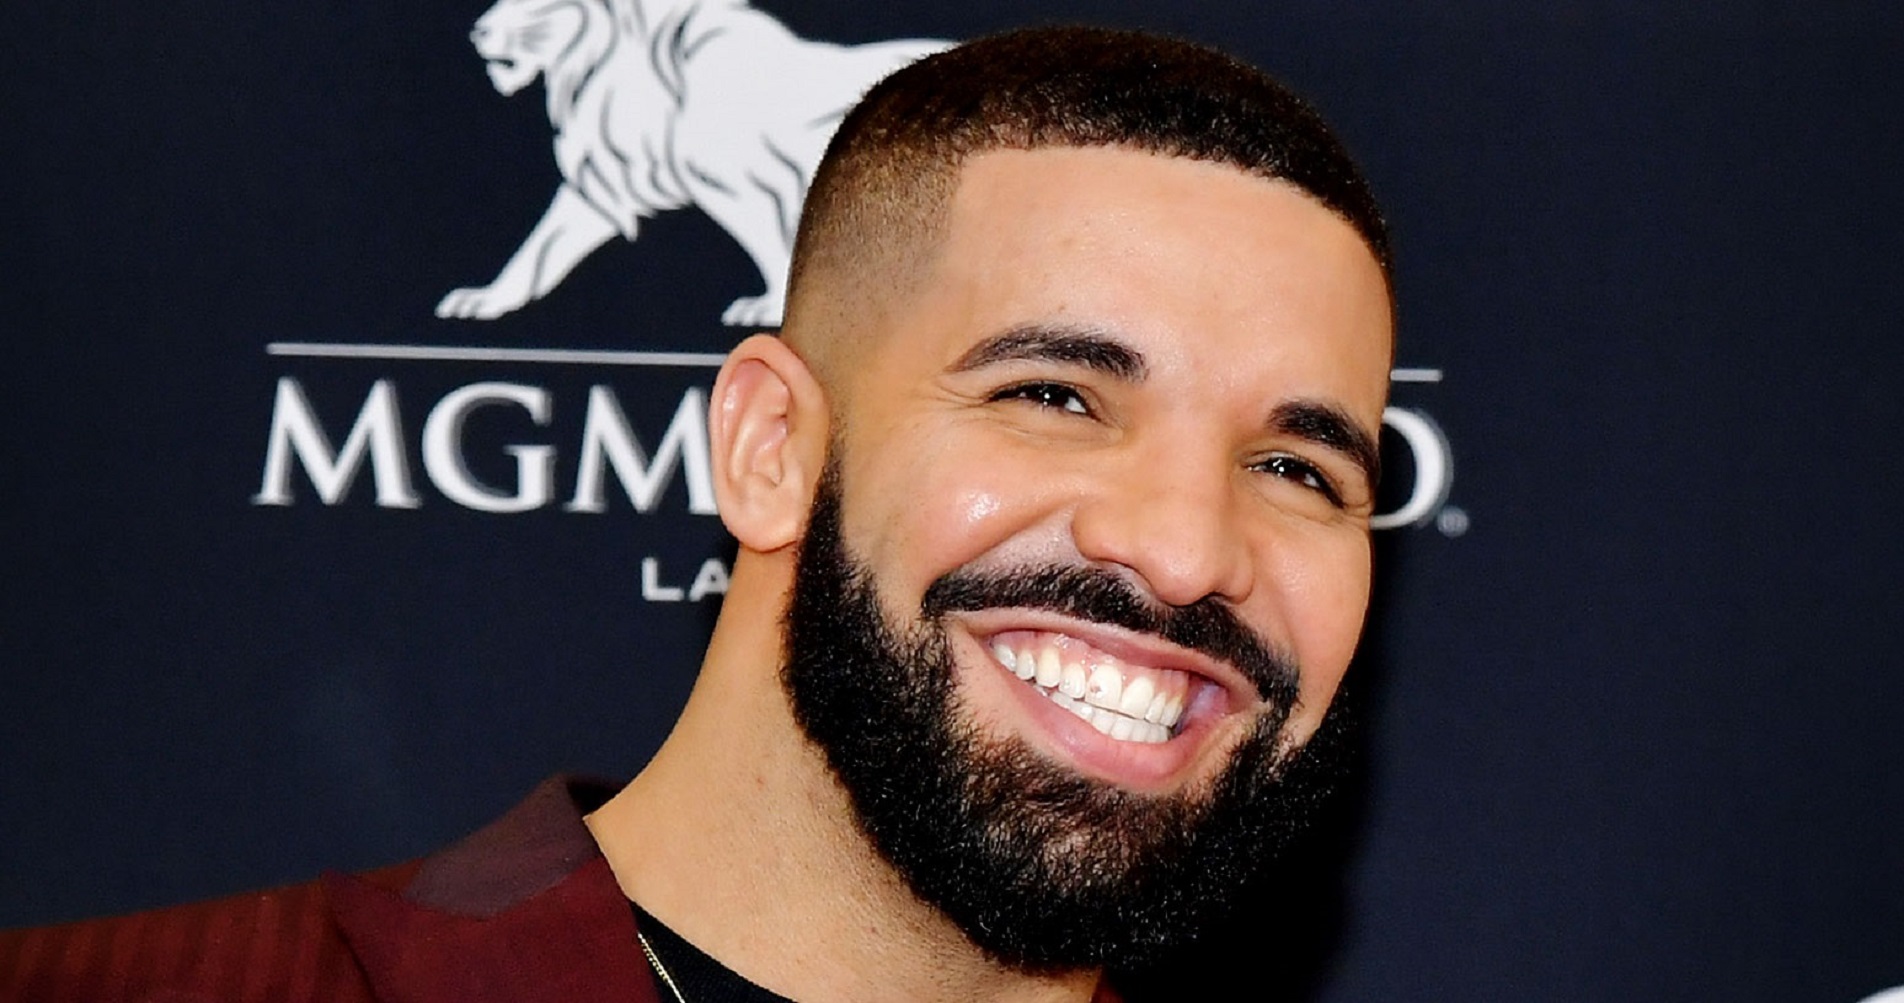 With New Song ‘Oprah’s Bank Account’, Drake Now Has More Hot 100 Hits Than Any Other Aritst!